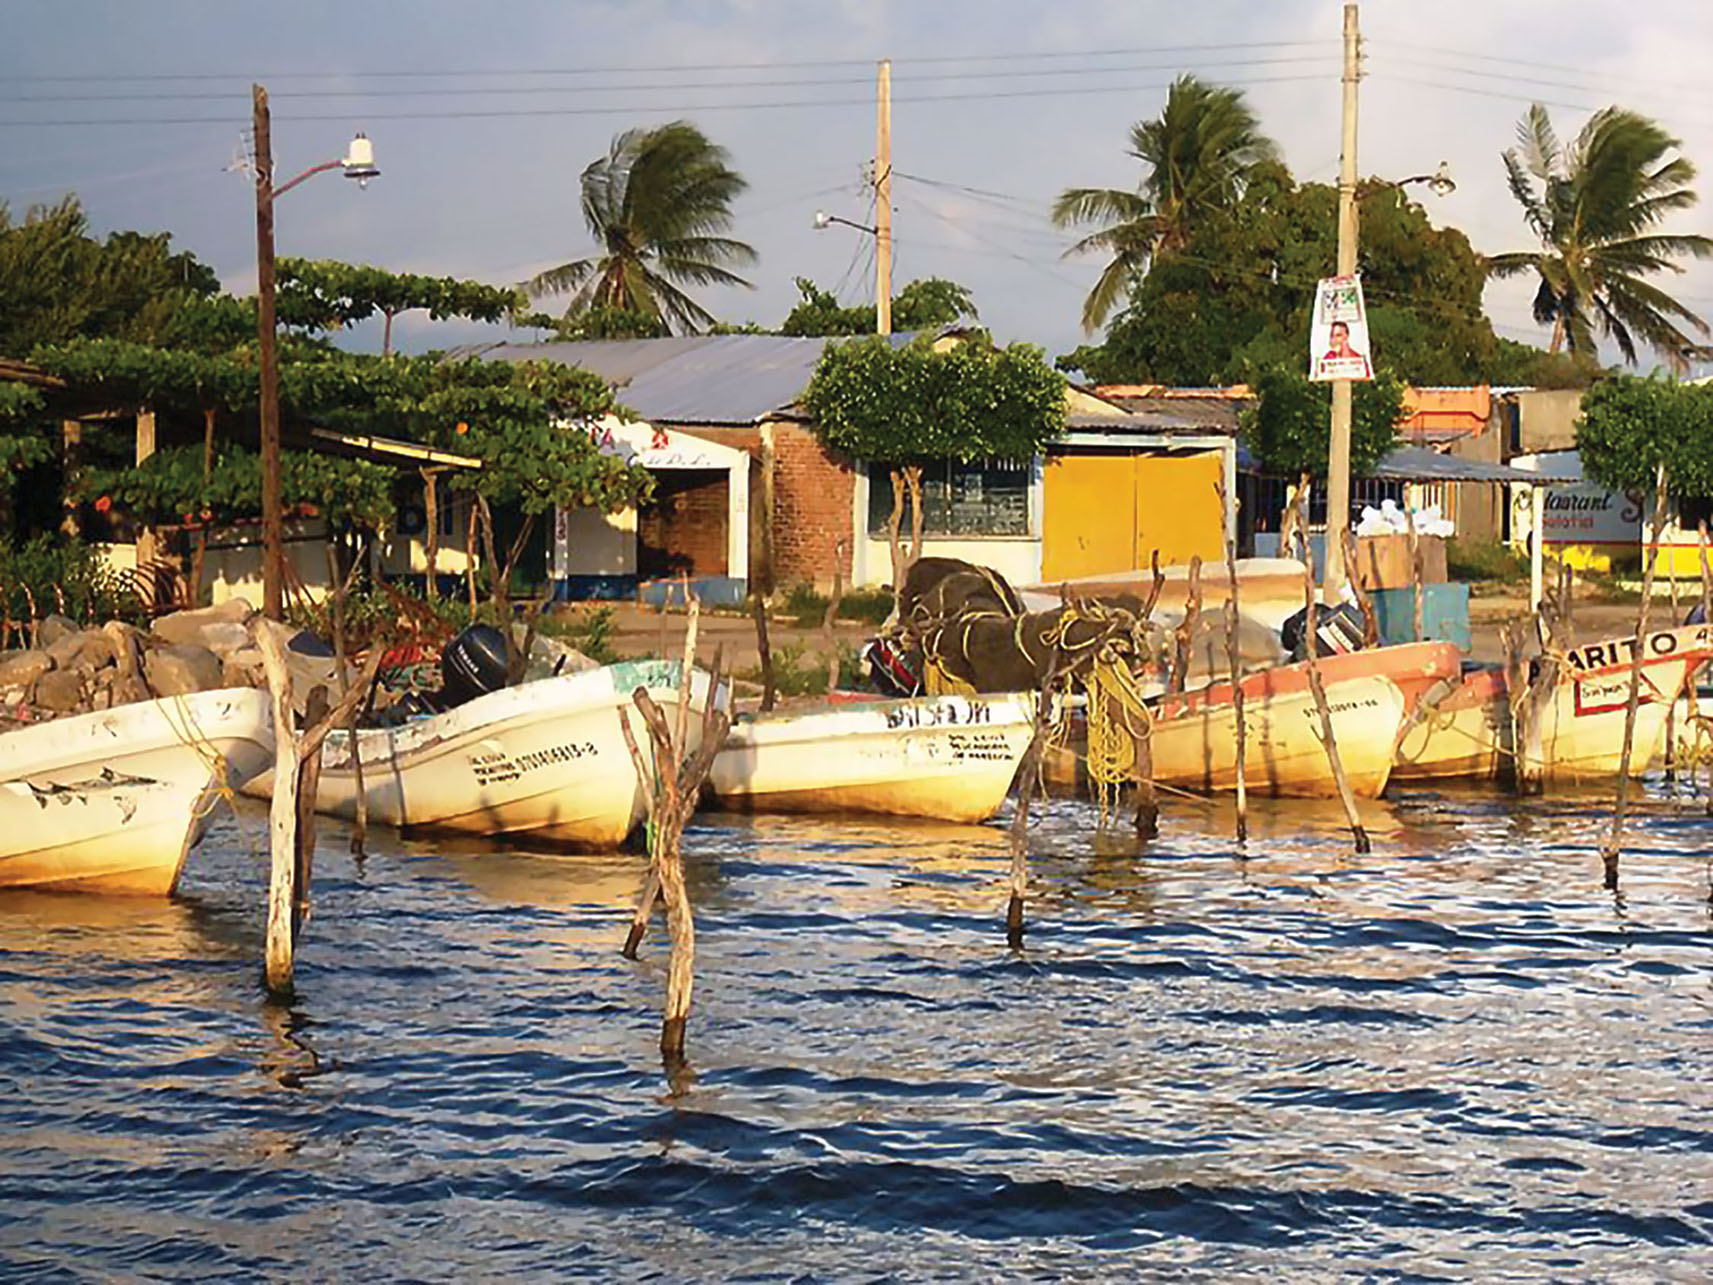 Fishing boats line the docks in Chiapas, Mexico. (Photo by Néstor Fernando Hernández Candelaria.)